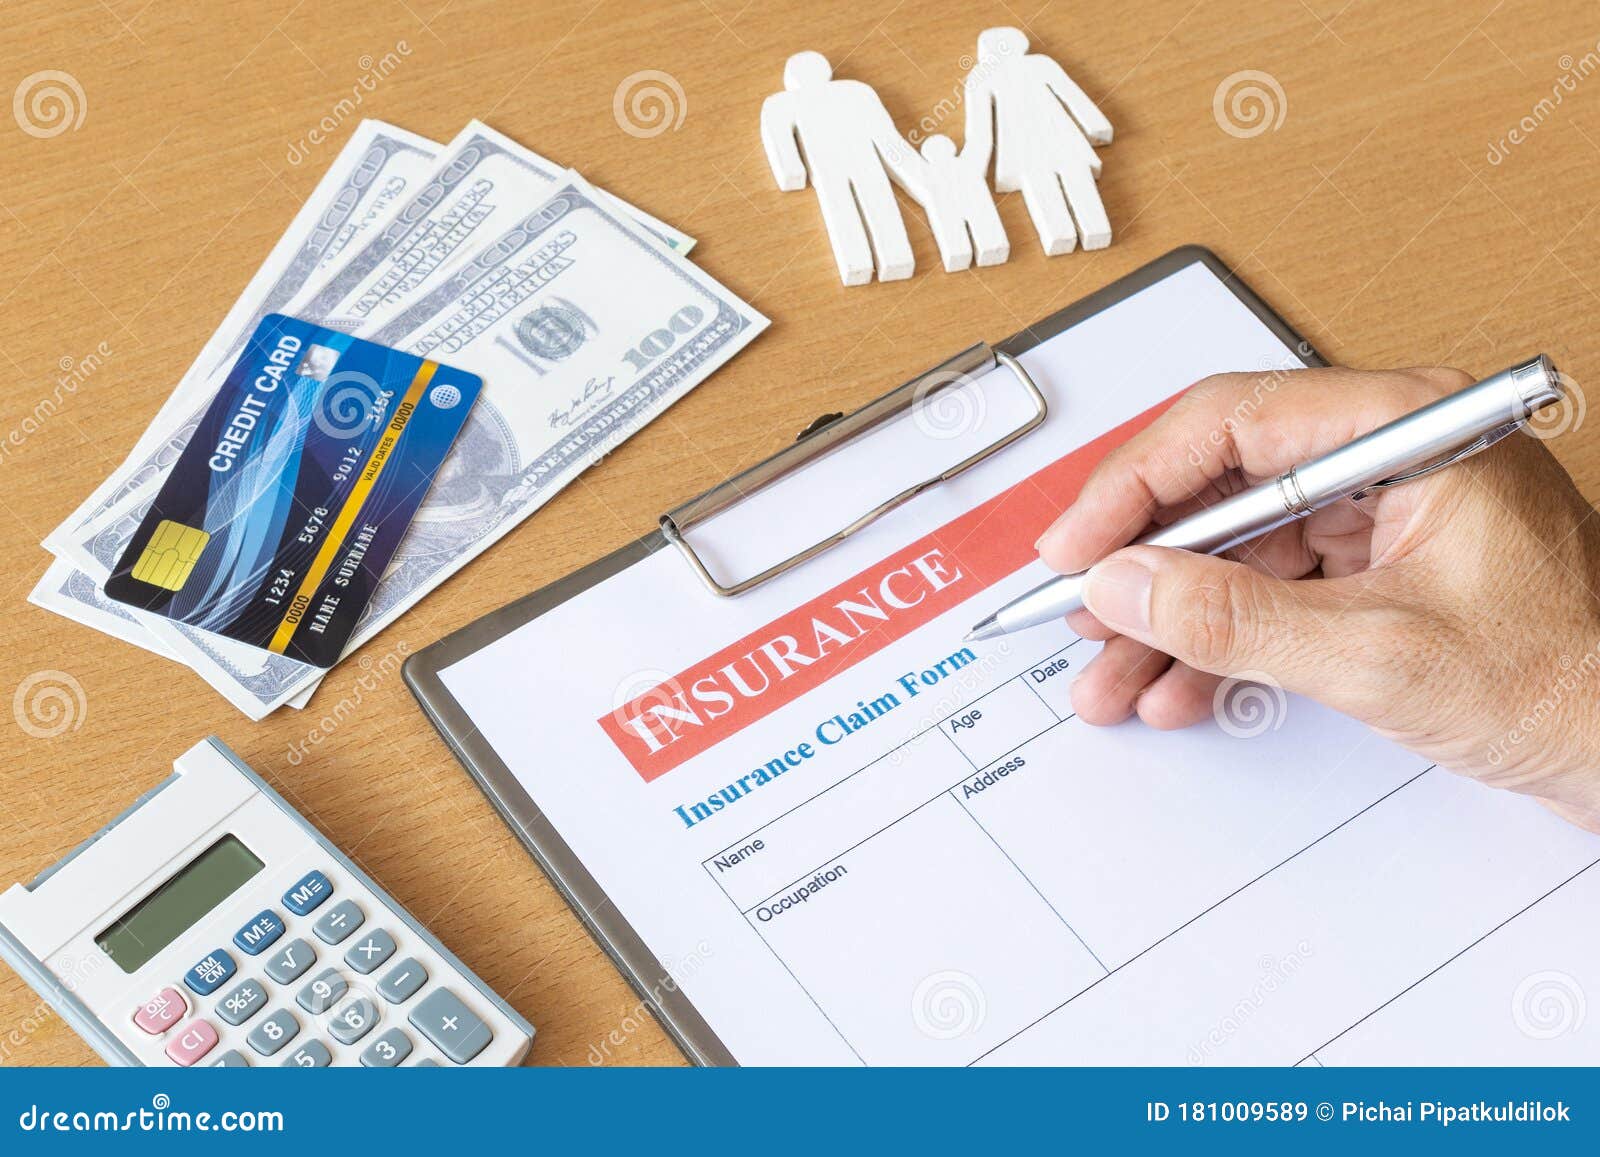  A person is filling out an insurance claim form with a pen while a calculator, credit card, and paper money are placed on the table.